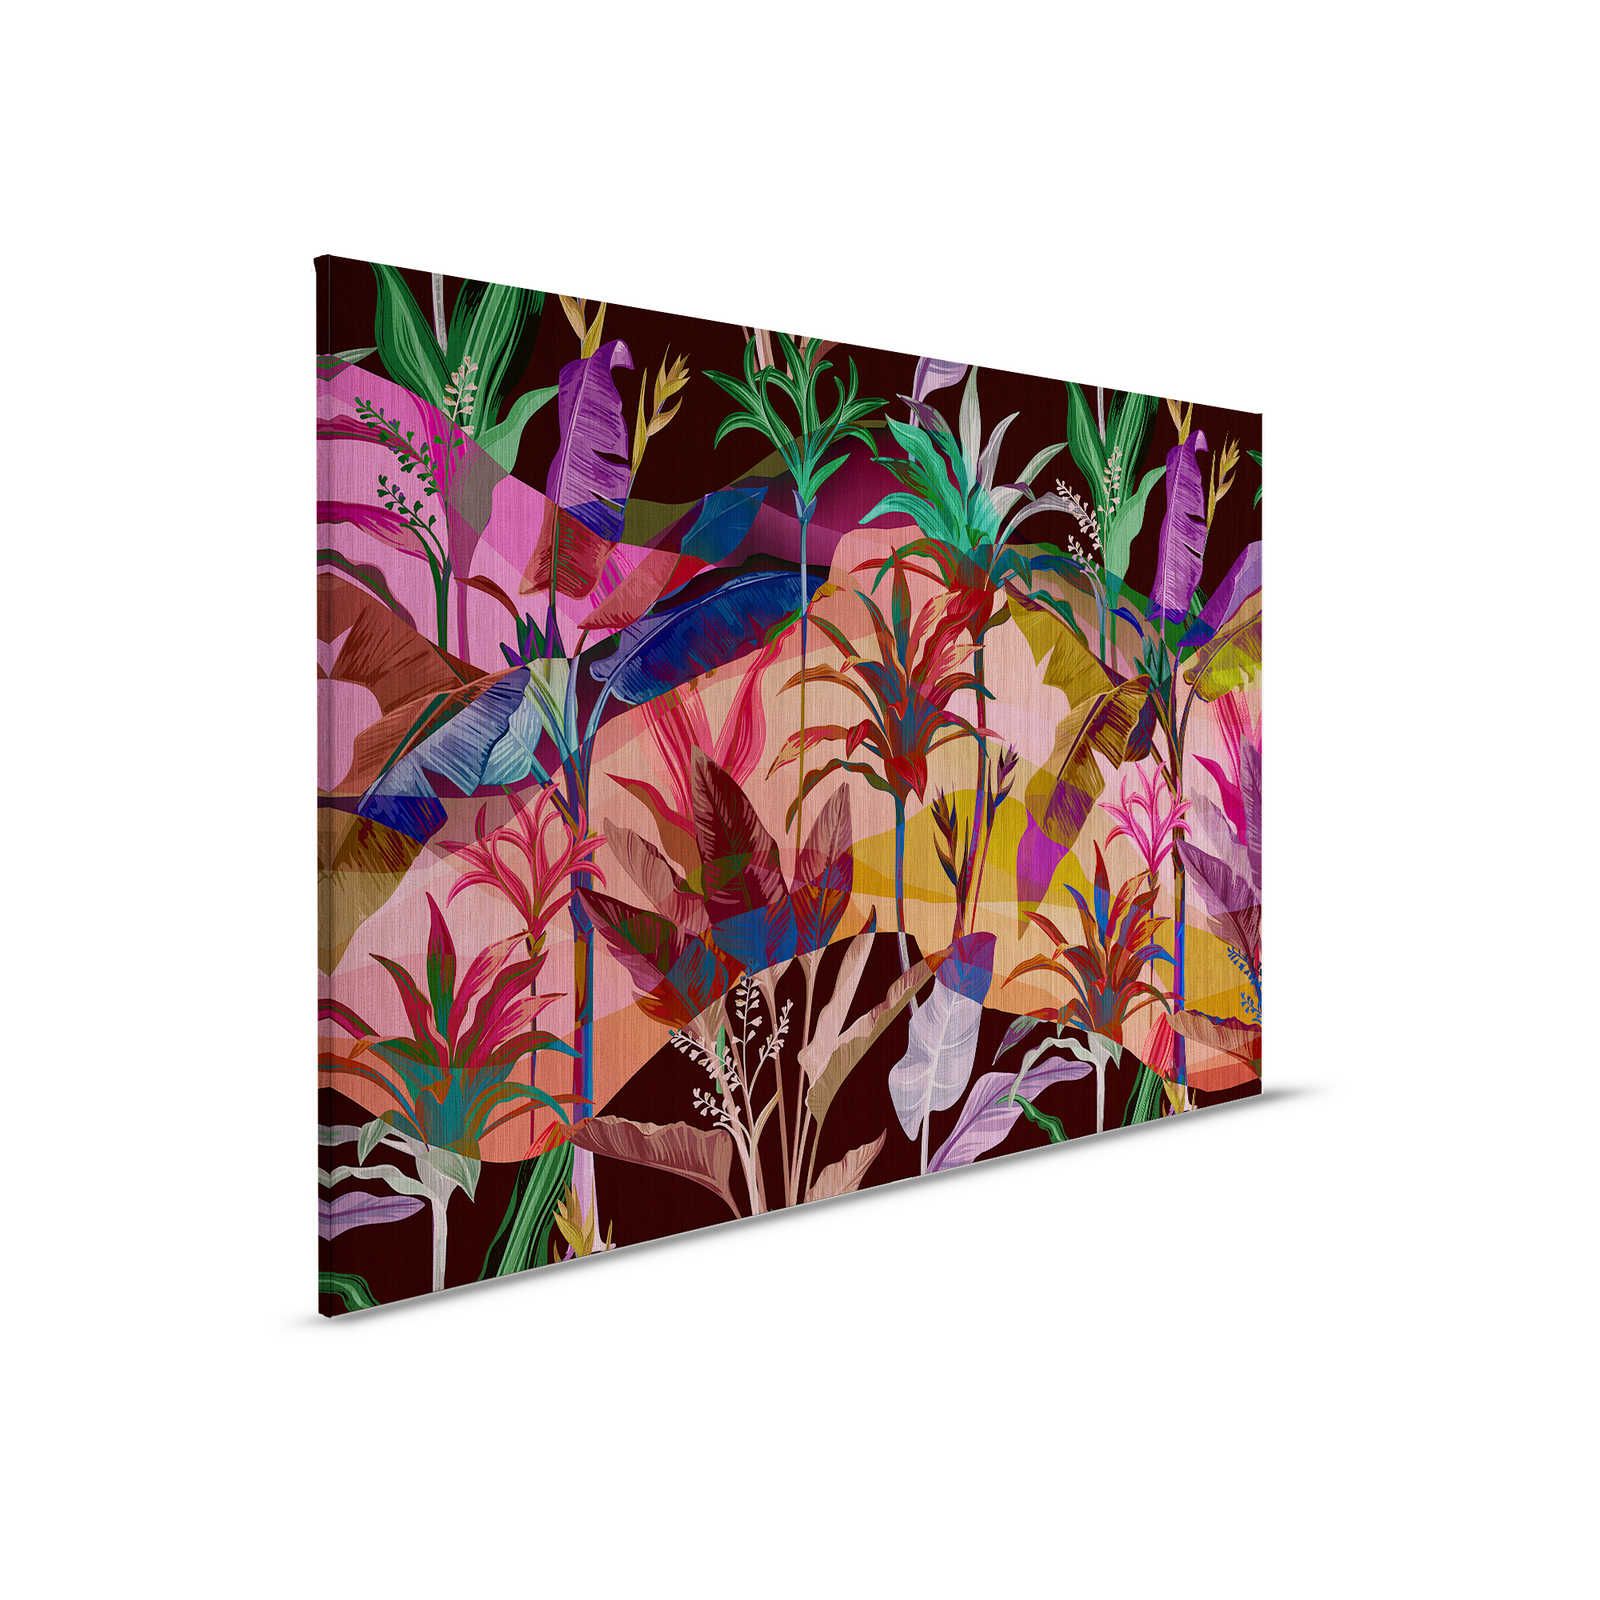 Palmyra 1 - Jungle canvas picture colourful & abstract leaves - 0,90 m x 0,60 m
